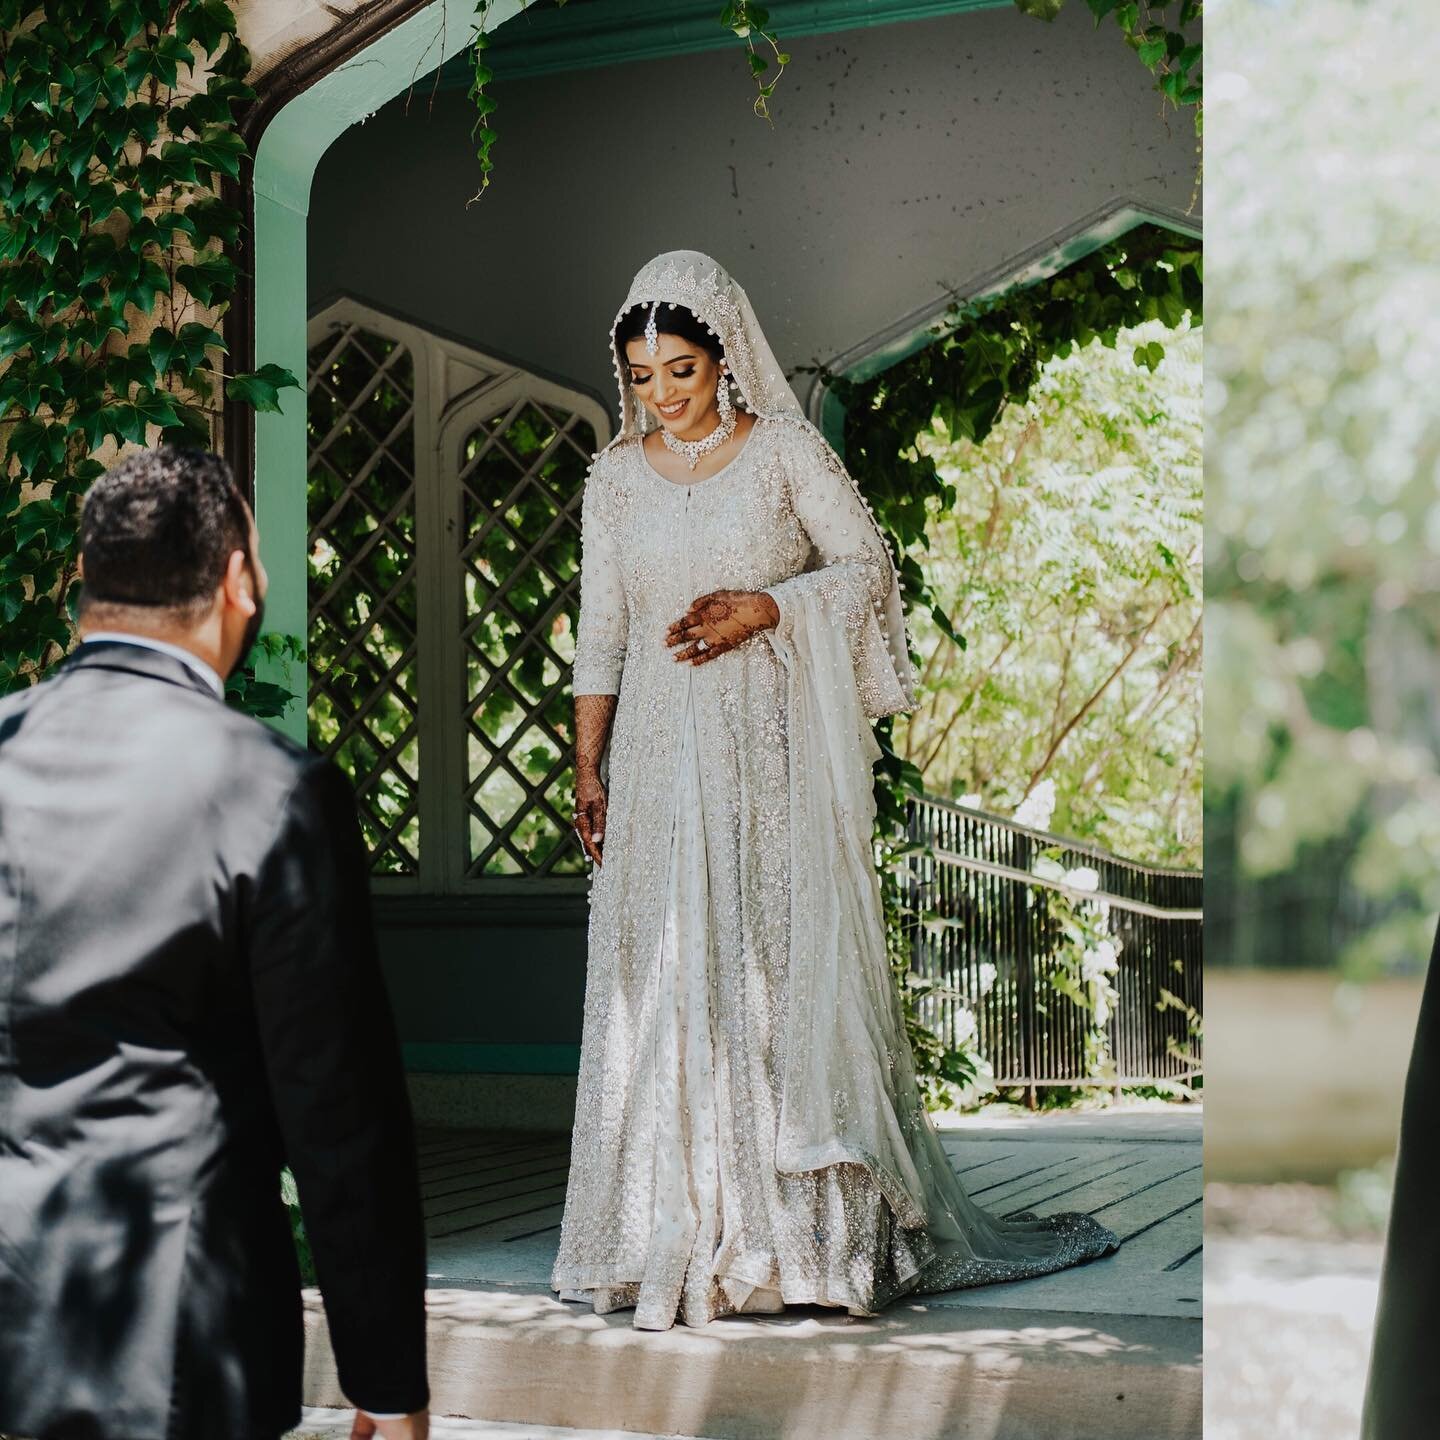 fati + hadi's wedding day was beautiful, joy filled, and just flat out wonderful. 

they're a couple that were just so kind-hearted, loving, and gracious. i'm so grateful to have gotten to meet them + play a part in their story :) 

lastly, it was al